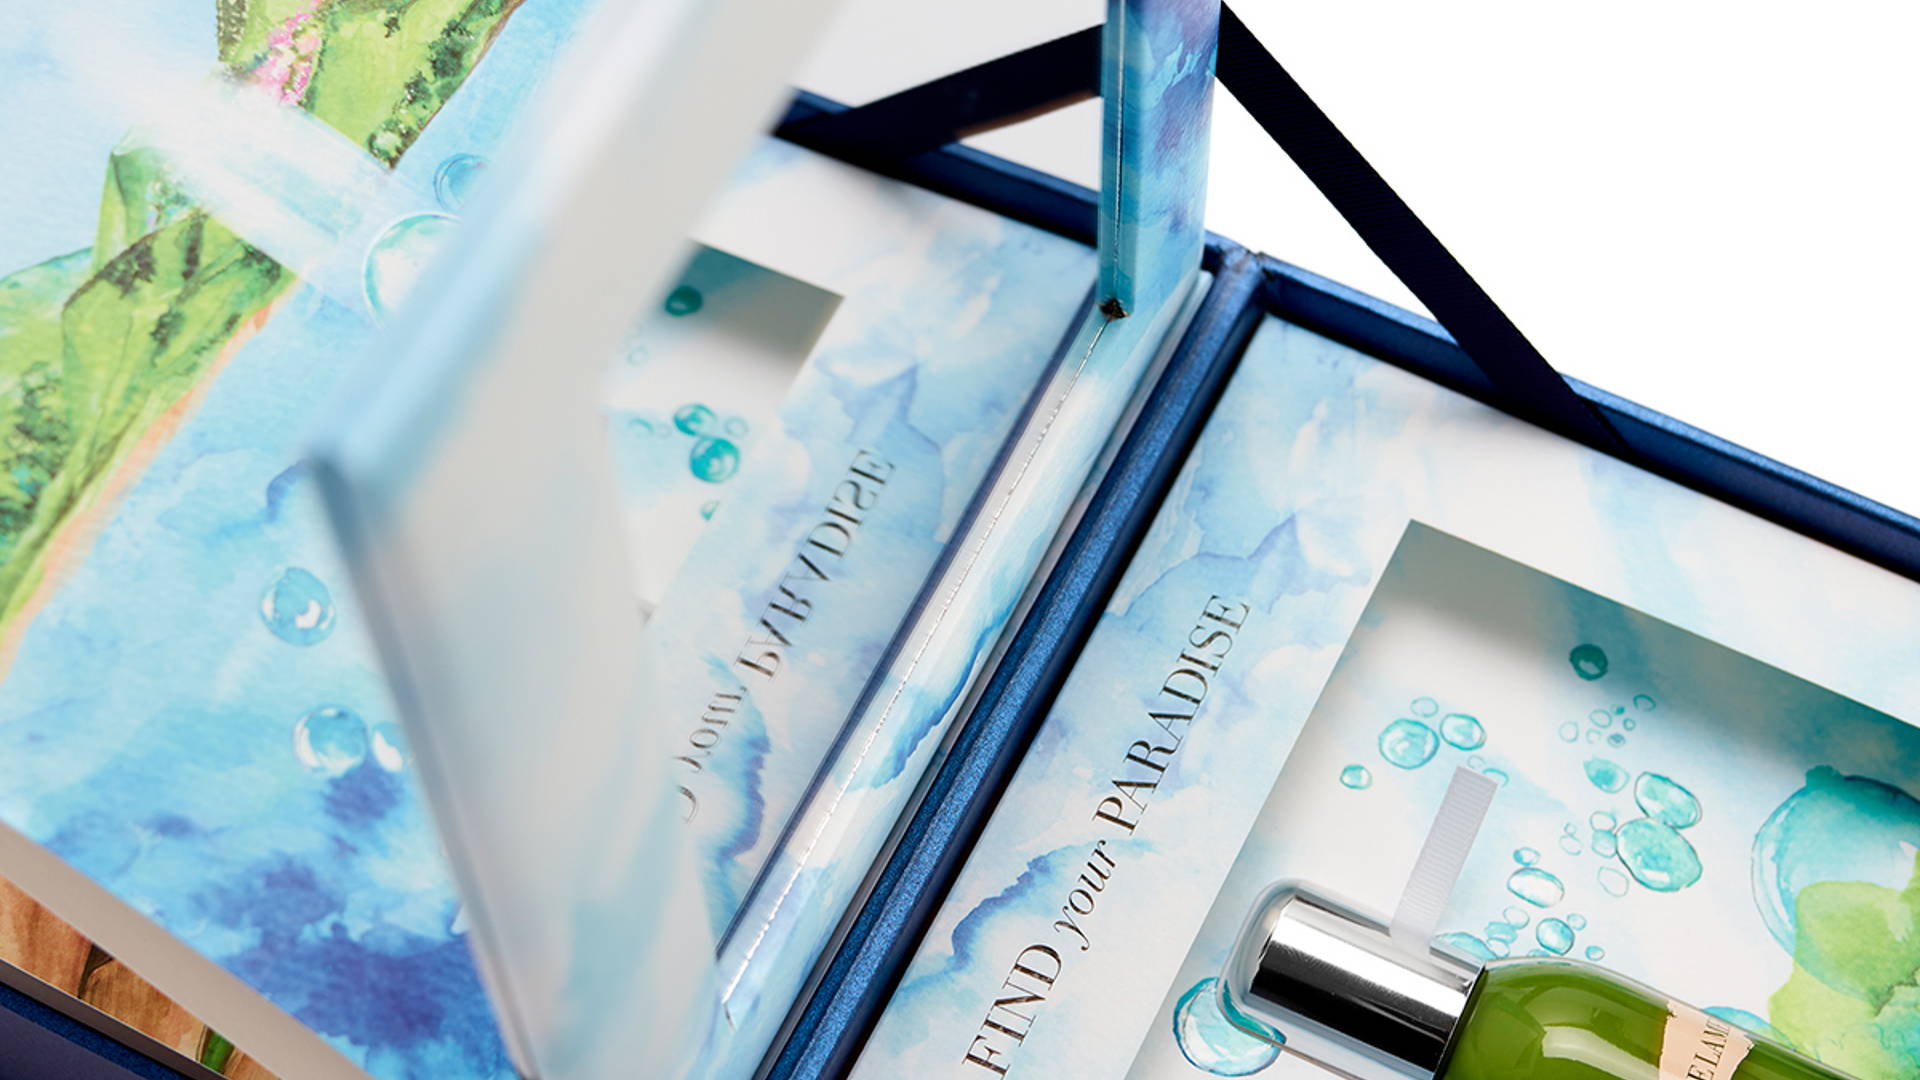 Featured image for This Ocean Inspired Packaging for La Mer is Exquisite